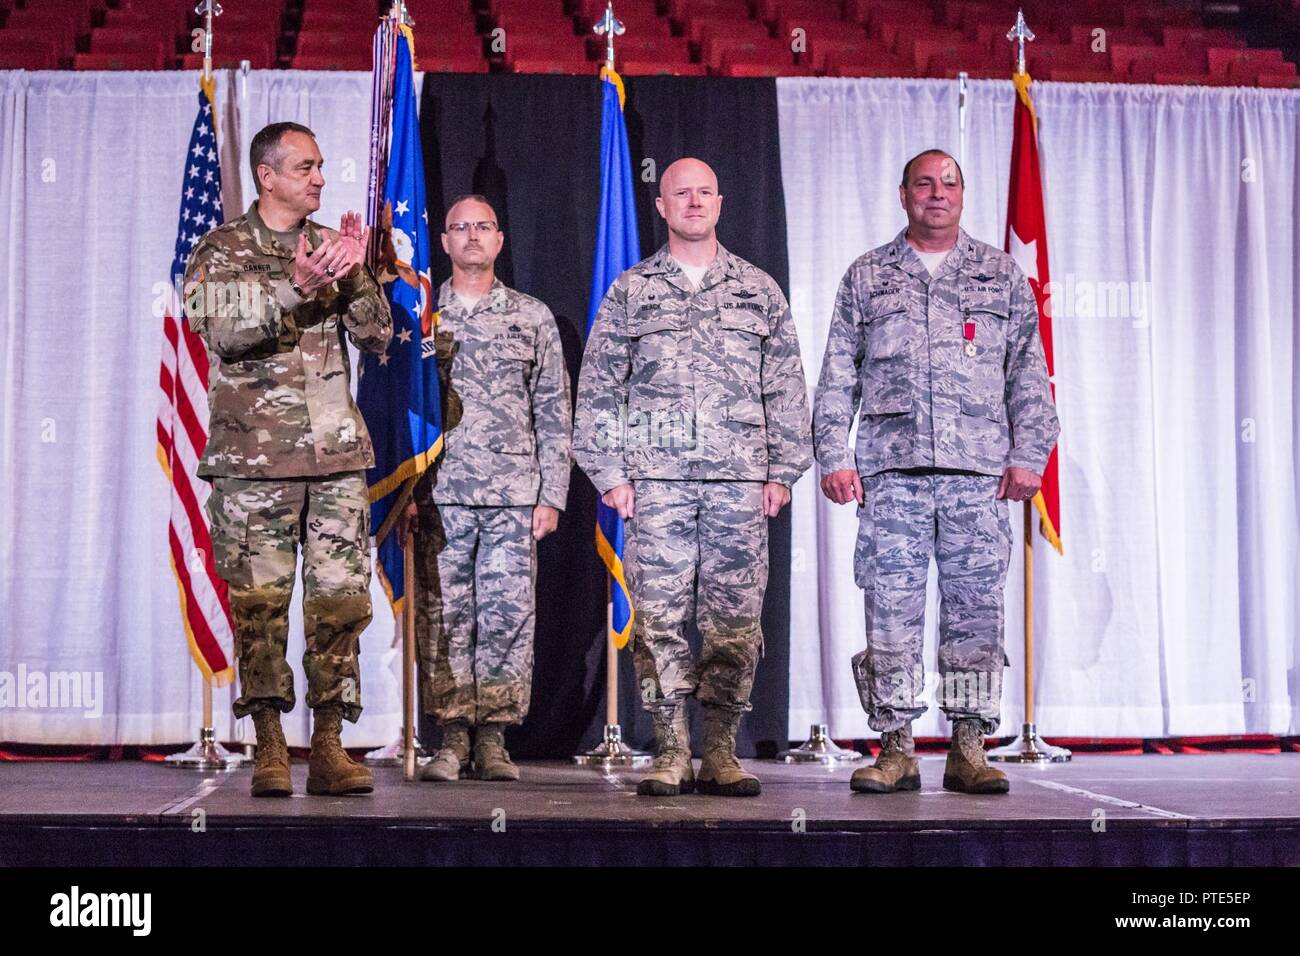 U.S. Air Force Col. Ed Black (center) takes command of the 139th Airlift Wing, Missouri Air National Guard, from Col. Ralph Schwader (right), during a change of command ceremony at the St. Joseph Civic Arena, St. Joseph, Mo. July 8, 2017. Col. Schwader will be assigned to Missouri Air National Guard Headquarters in Jefferson City, after more than 3 years commanding the 139th. Stock Photo